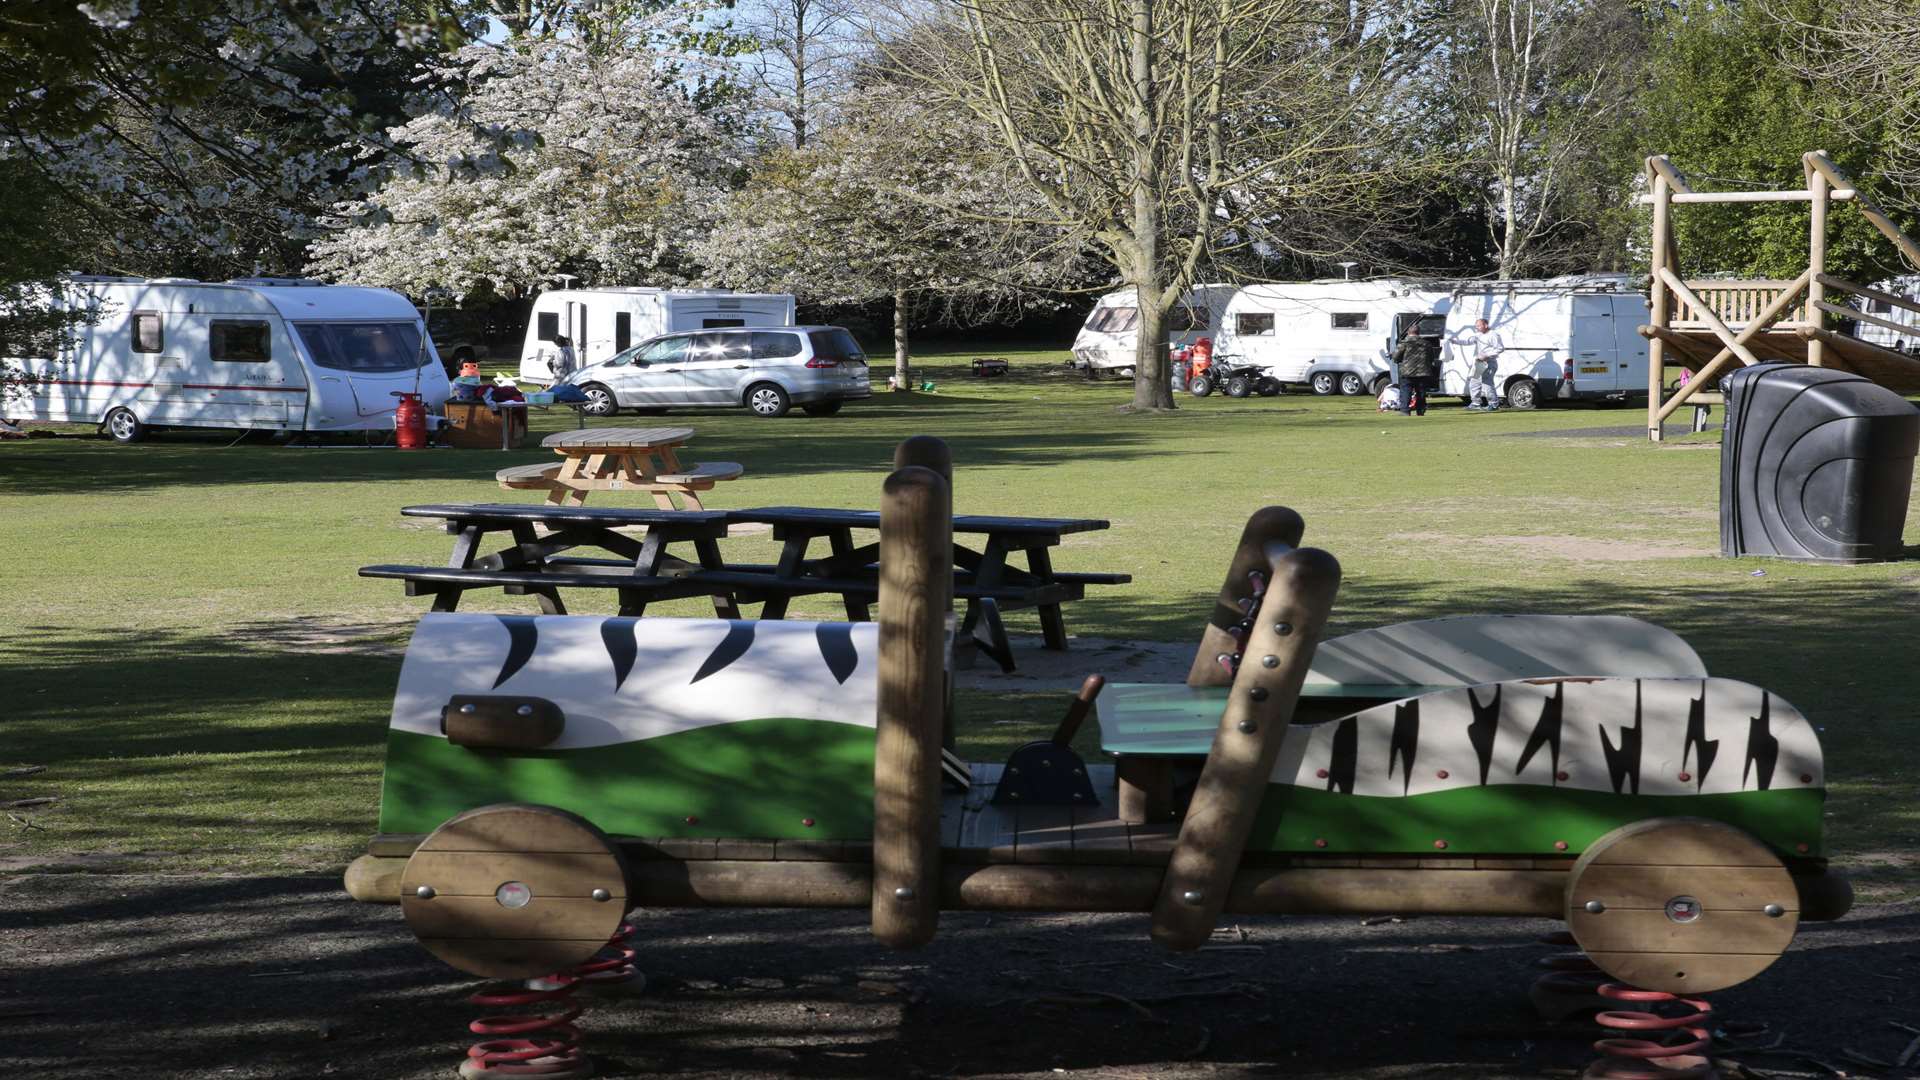 The travellers spent last week at Cobtree